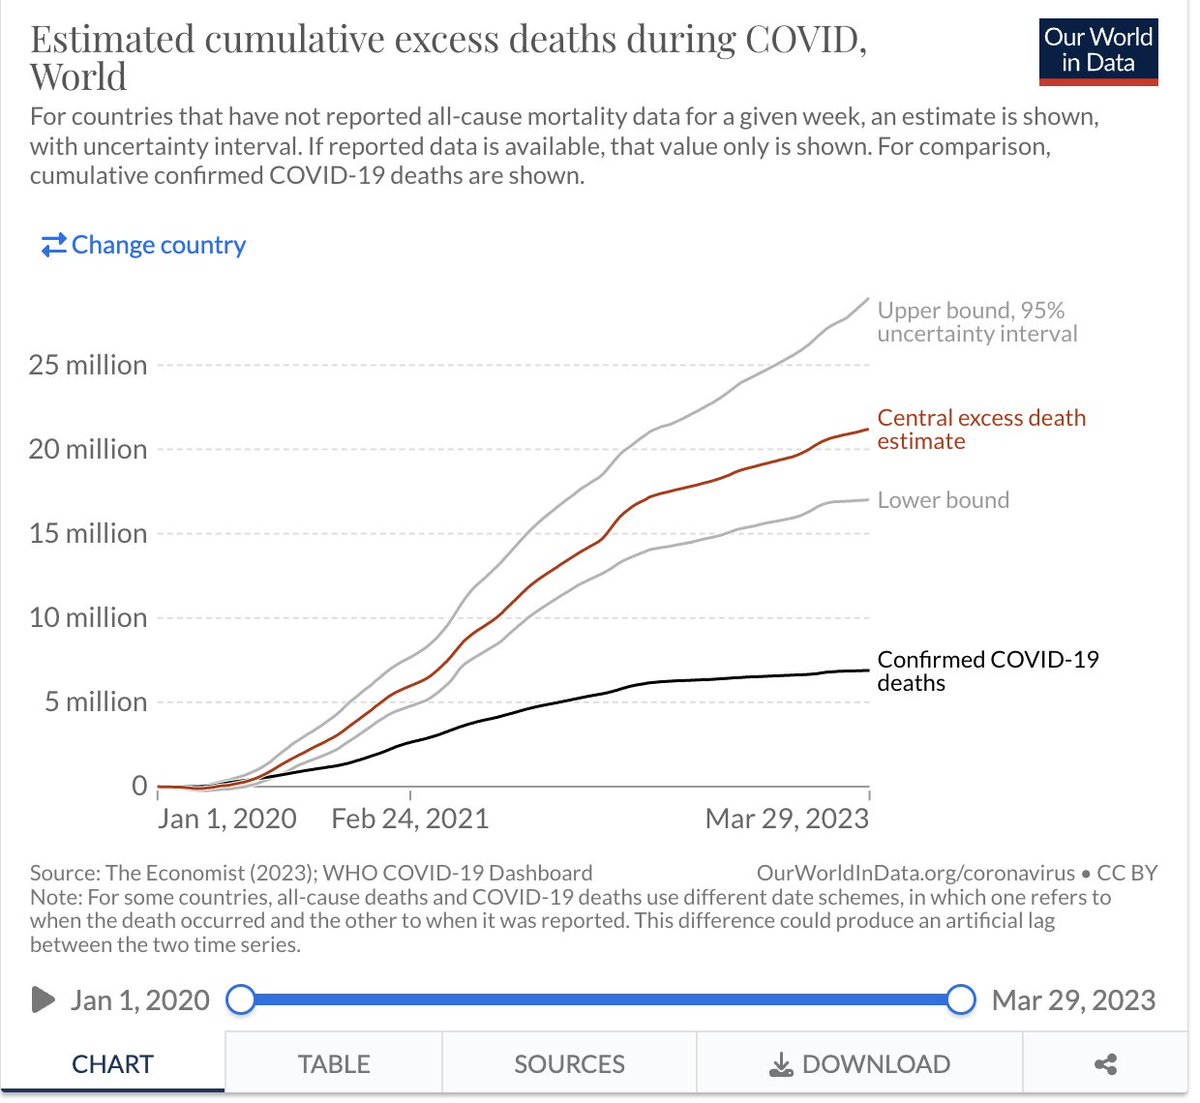 Silently, with no media discussion, people keep dying at rates far higher than before the COVID-19 pandemic. For every one person who officially dies from COVID-19, 2-4 more die from other, unnamed causes who would not have died before 2020. Welcome to the perpetual pandemic.